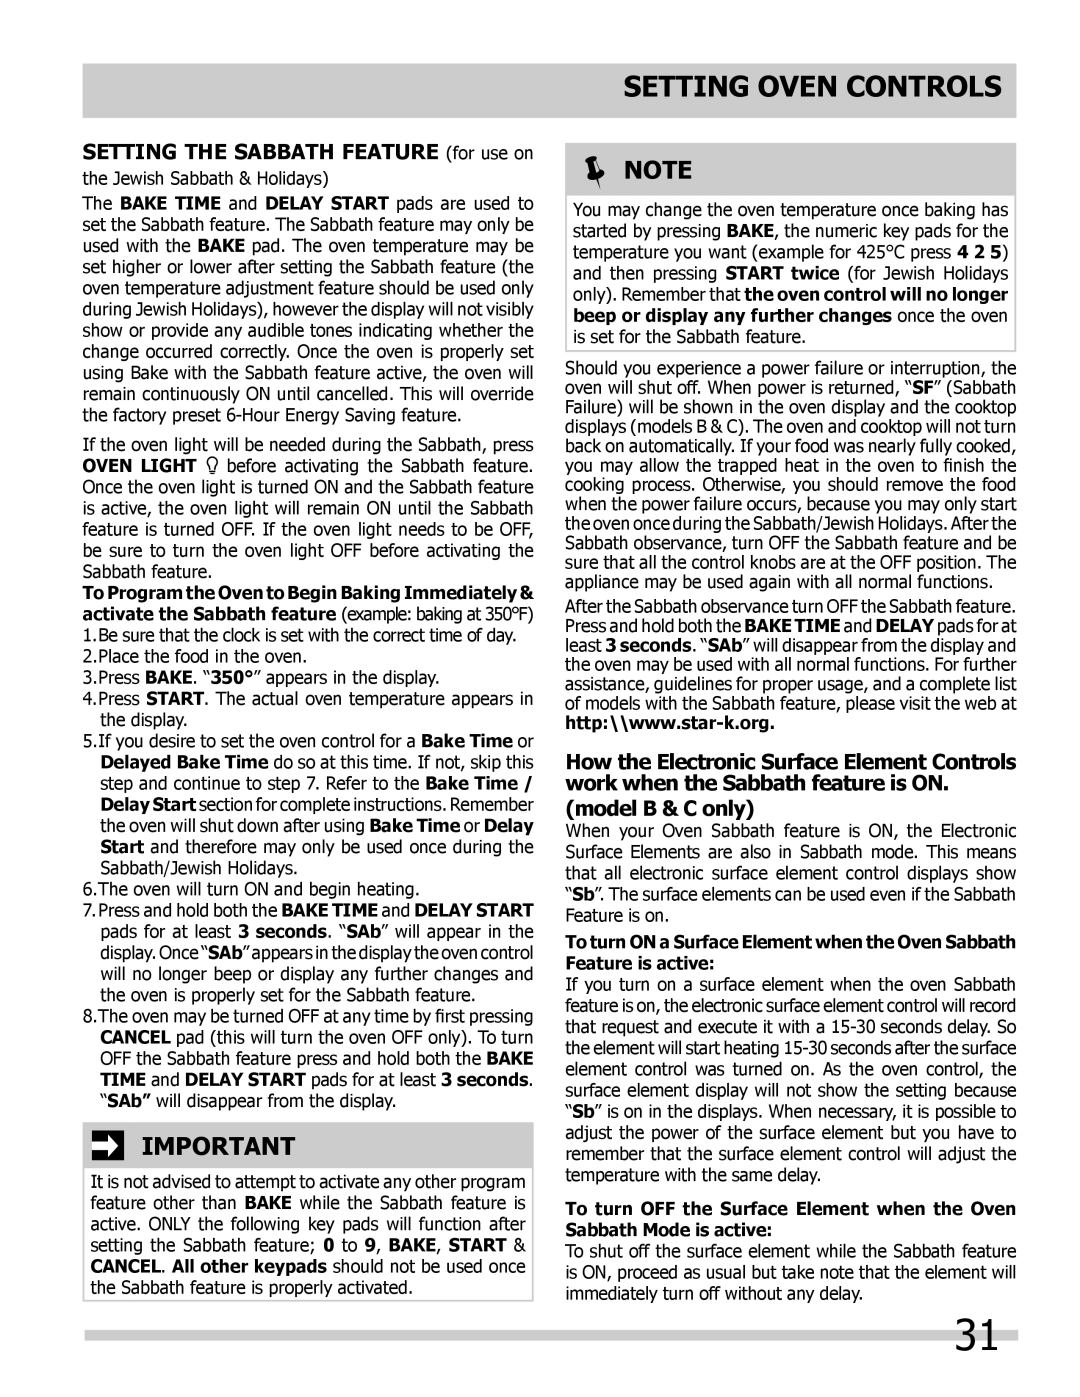 Frigidaire FGES3045KB, FGES3065KF, FGES3065KB SETTING THE SABBATH FEATURE for use on, Setting Oven Controls,  Note 